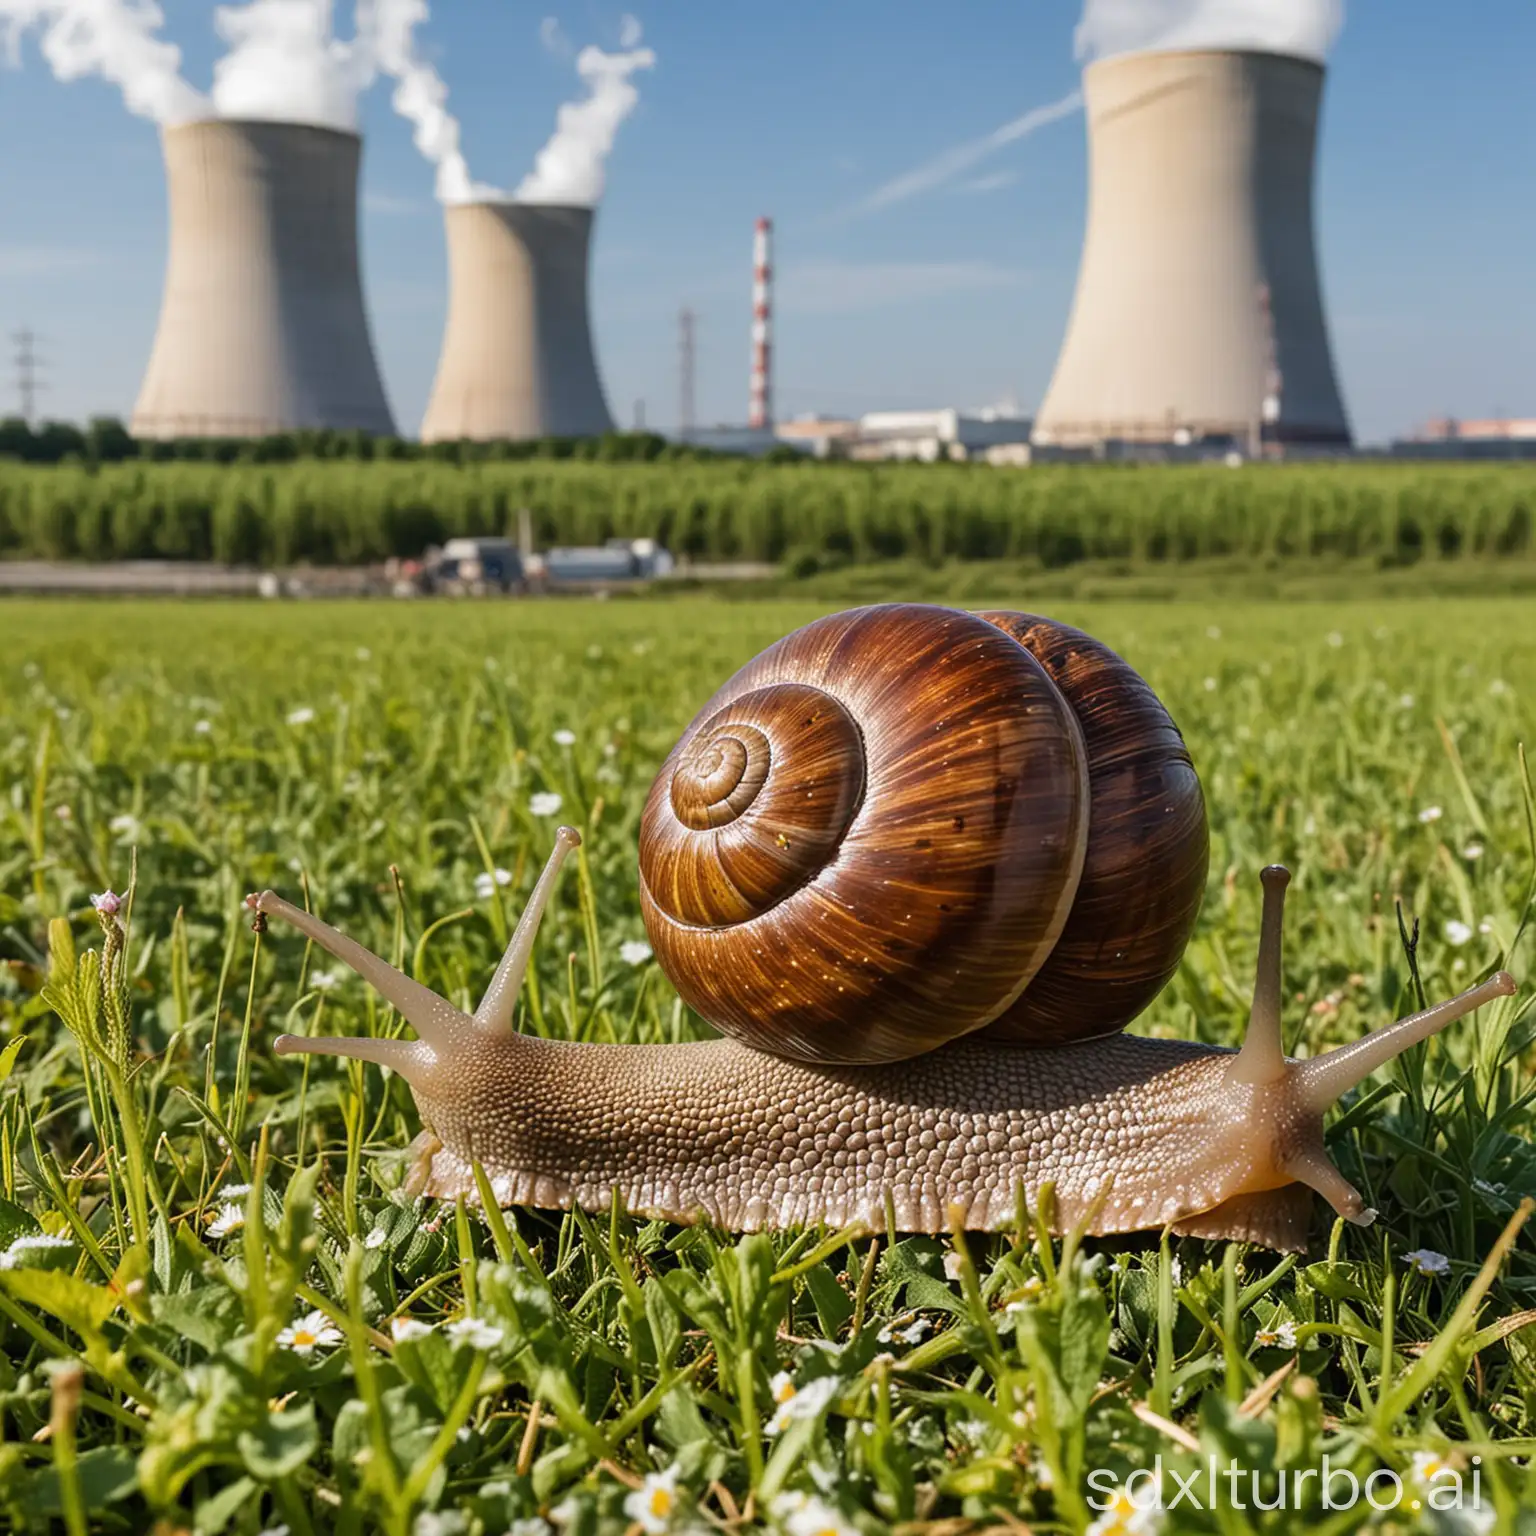 a big mutated vineyard snail with many caps on a meadow in front of a nuclear power plant in the background, total